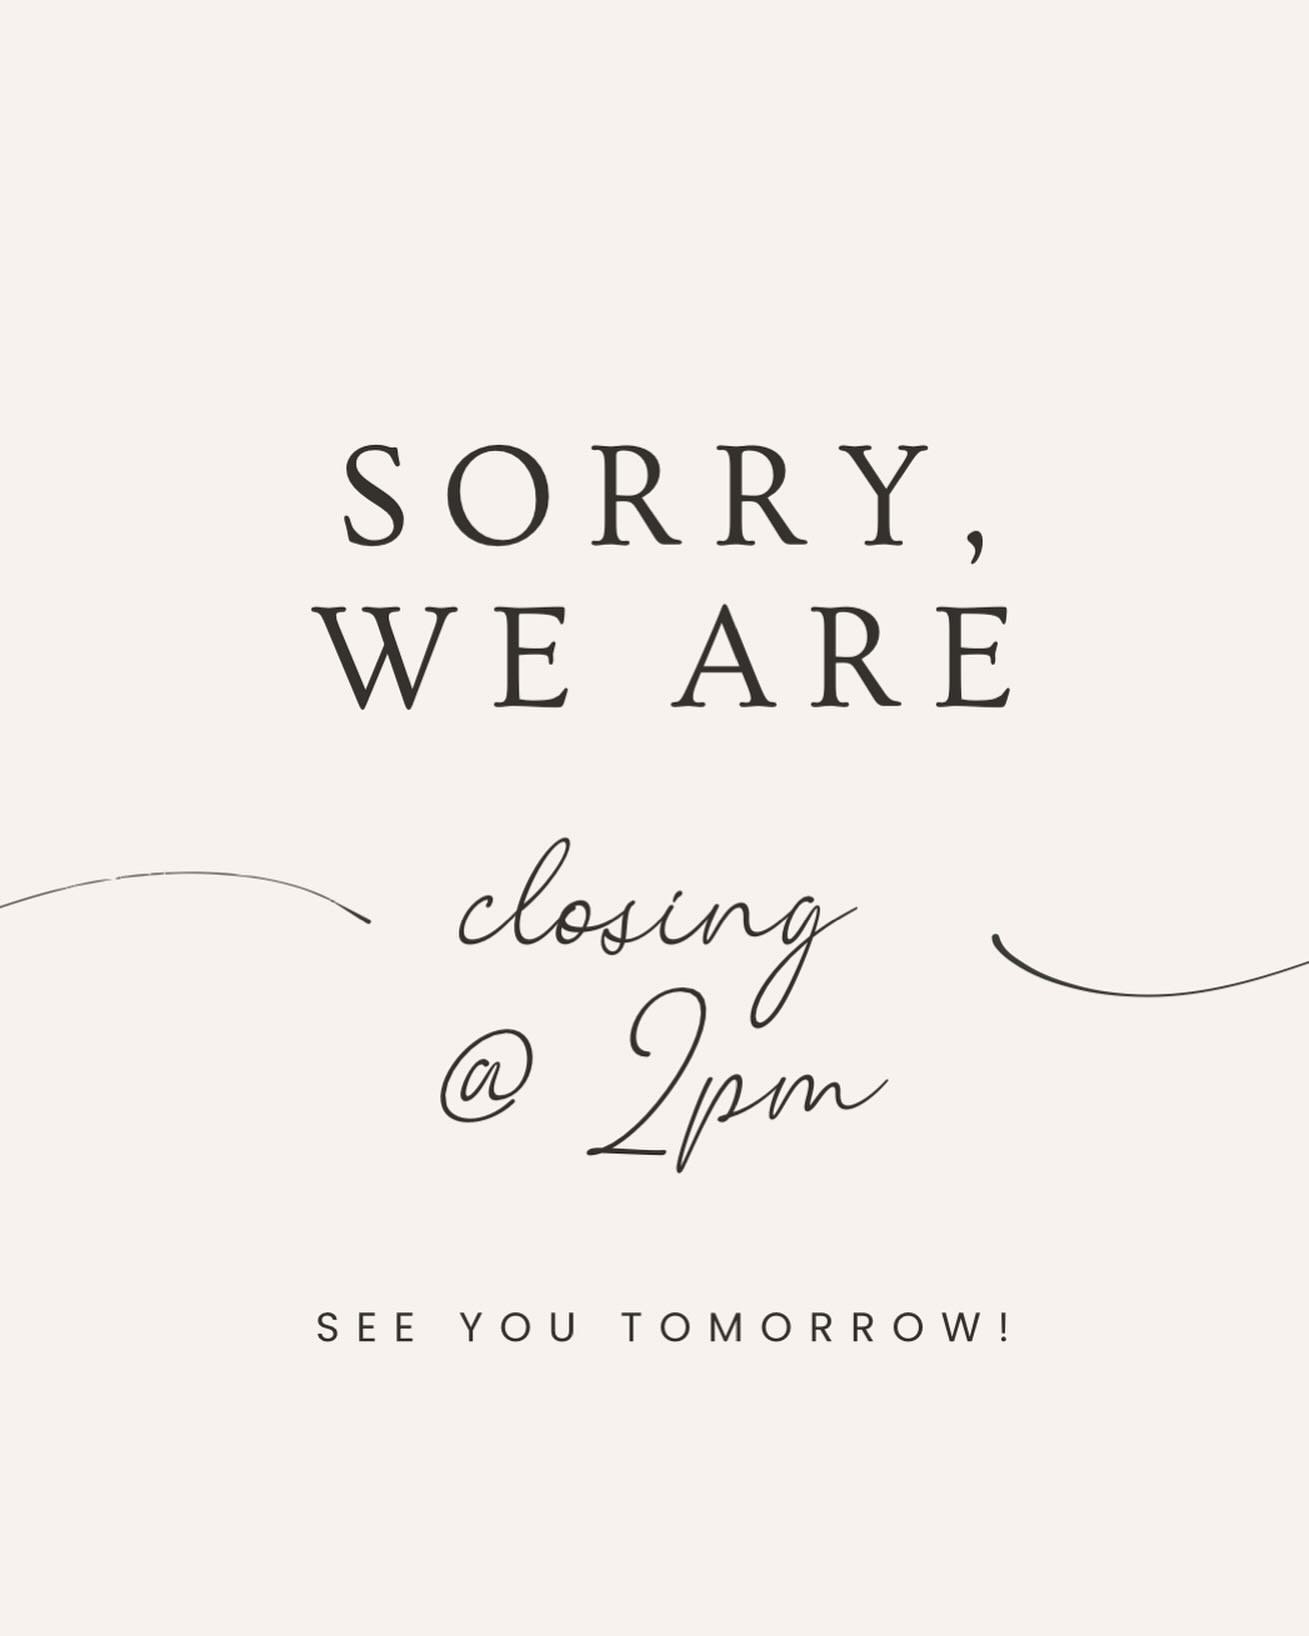 Friends, we&rsquo;ll be closing early today to ensure our staff and everyone gets home well before any traffic and severe weather hits. 

Thank you for your understanding.

#oklahomaweatherproblems